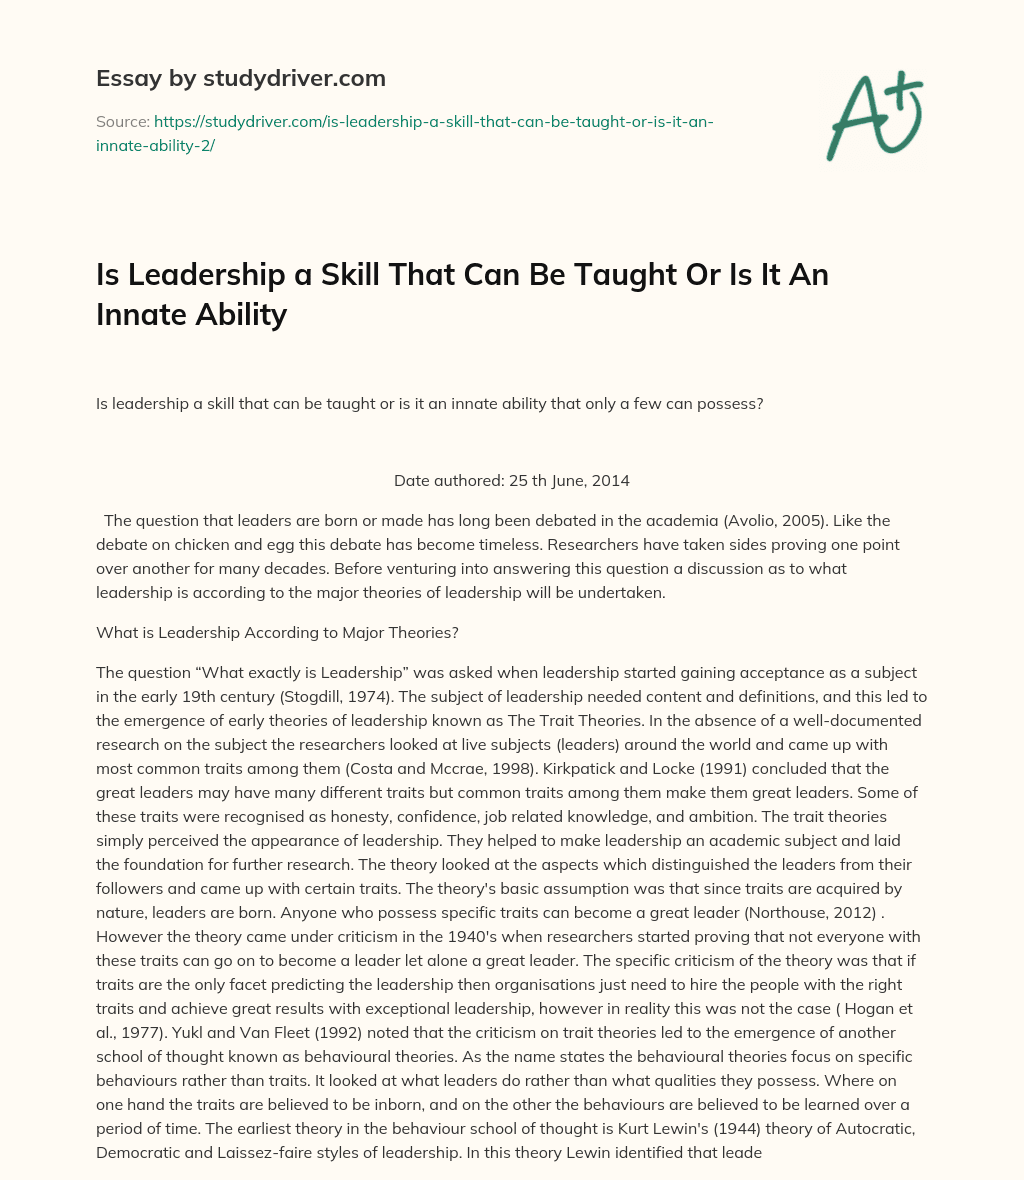 Is Leadership a Skill that Can be Taught or is it an Innate Ability essay